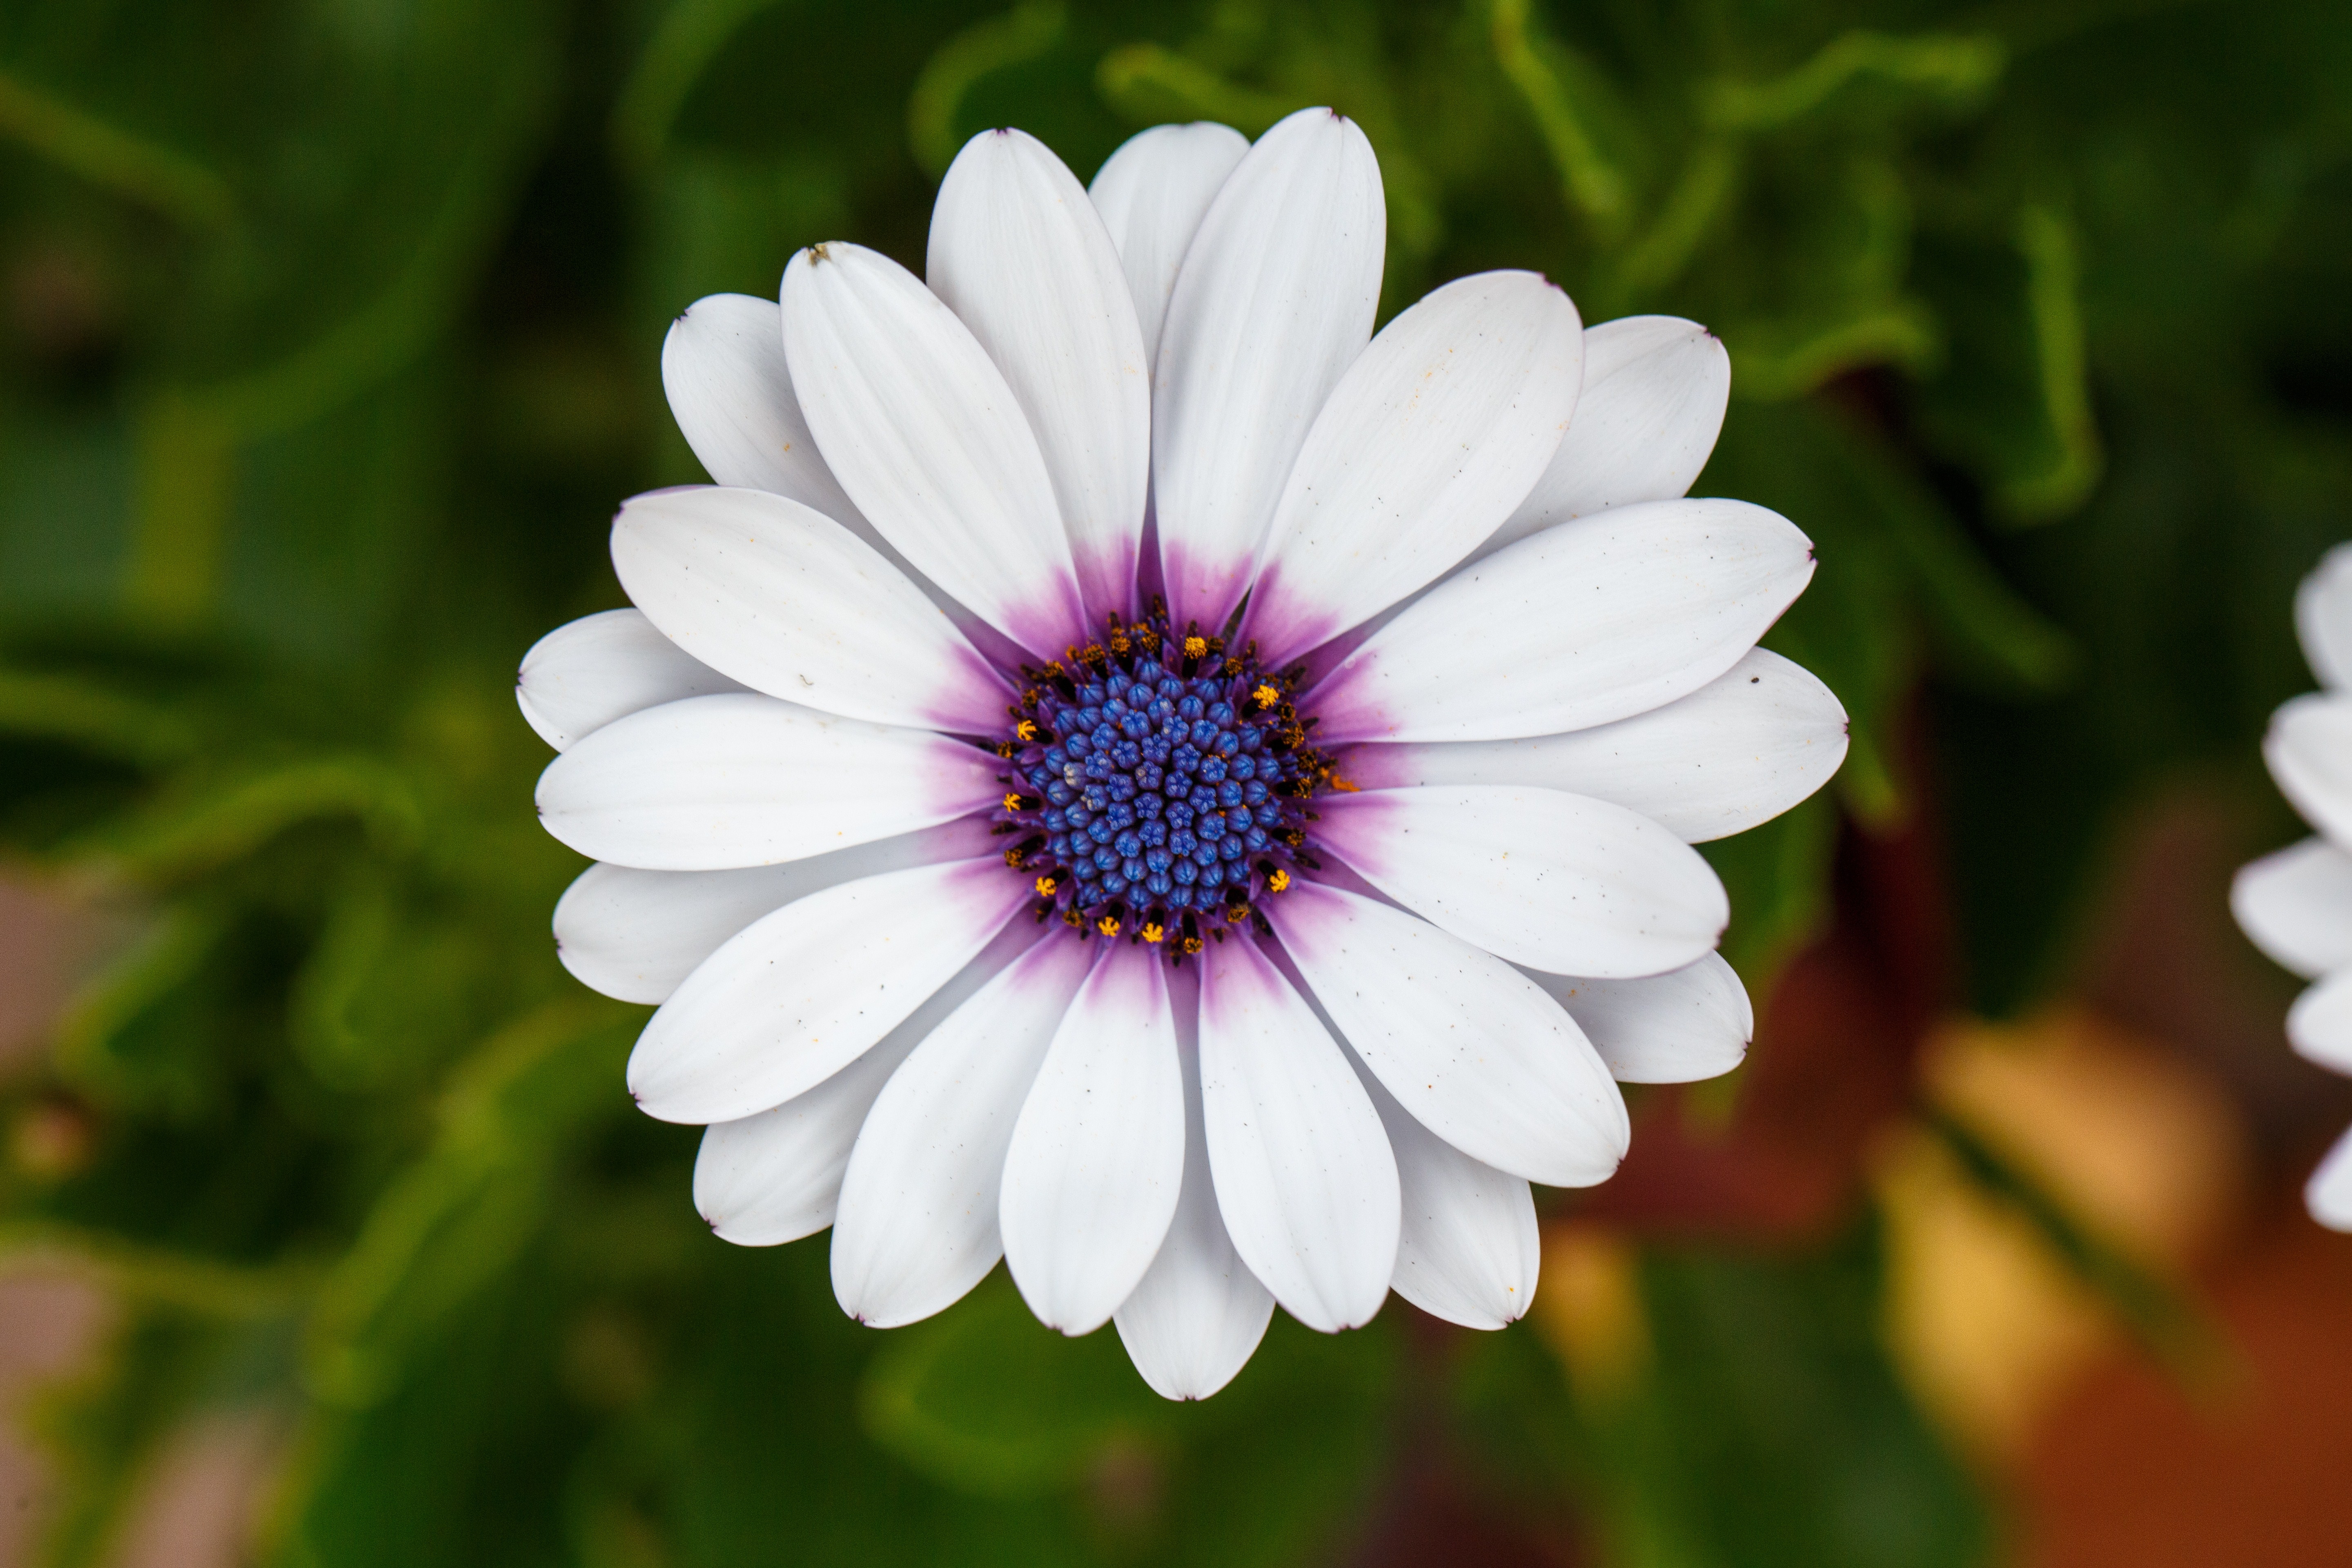 A white Cape daisy, also known as osteospermum, with a blue and purple center.